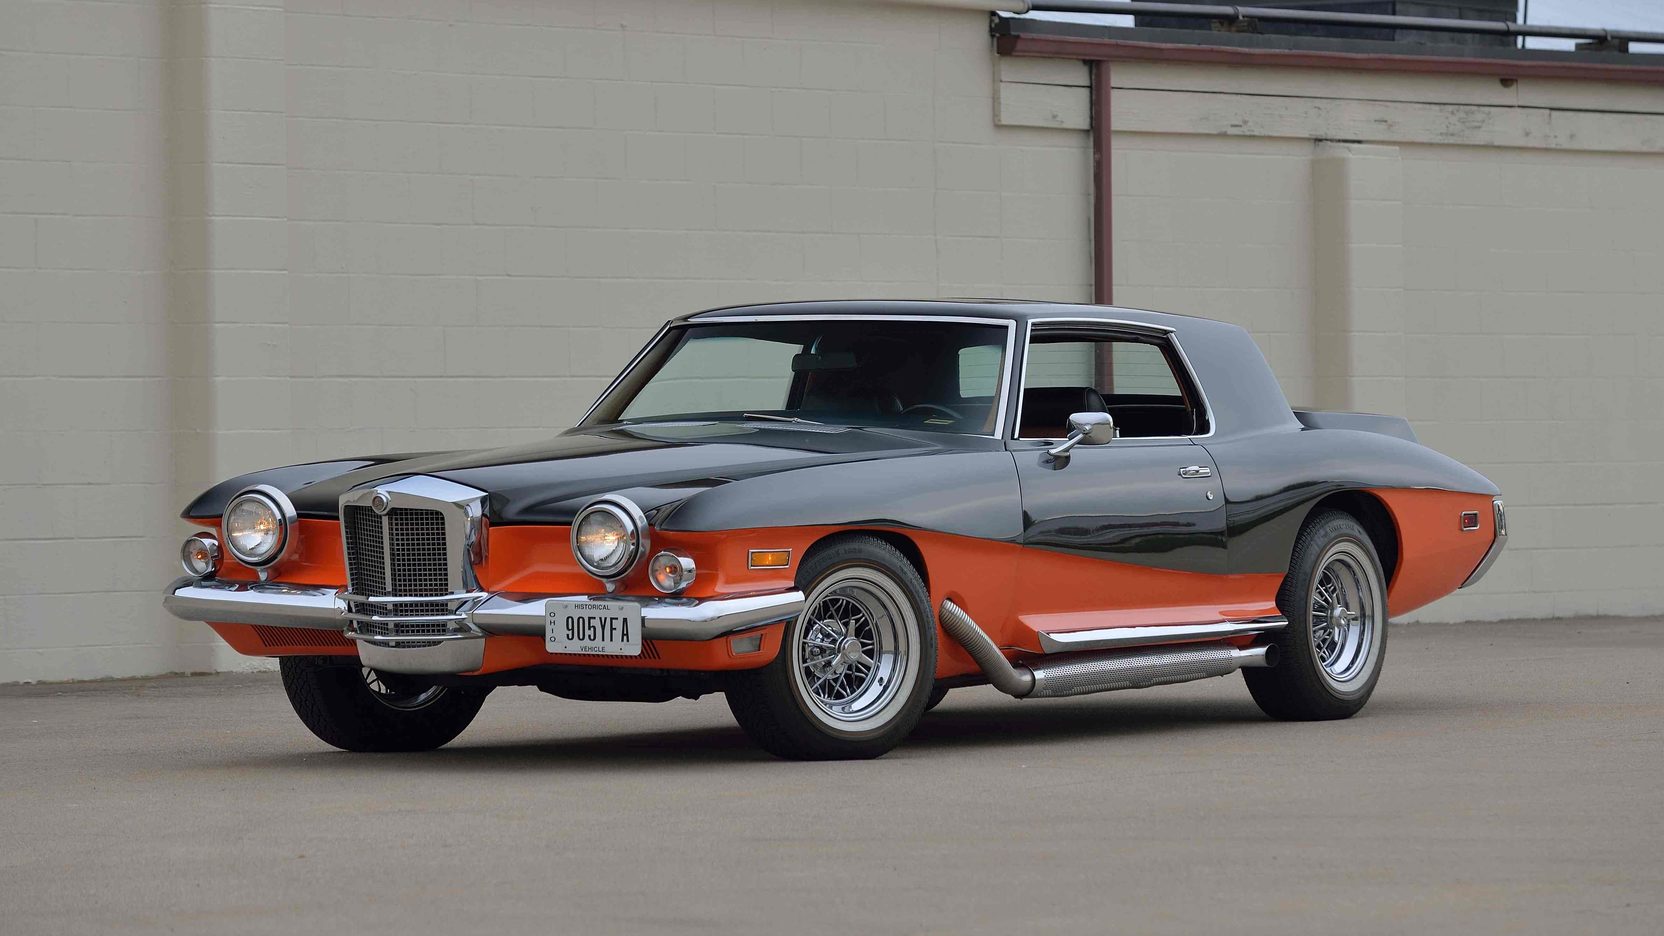 The Stutz Blackhawk was a beautiful yet ruggedly built car with a lot of performance.